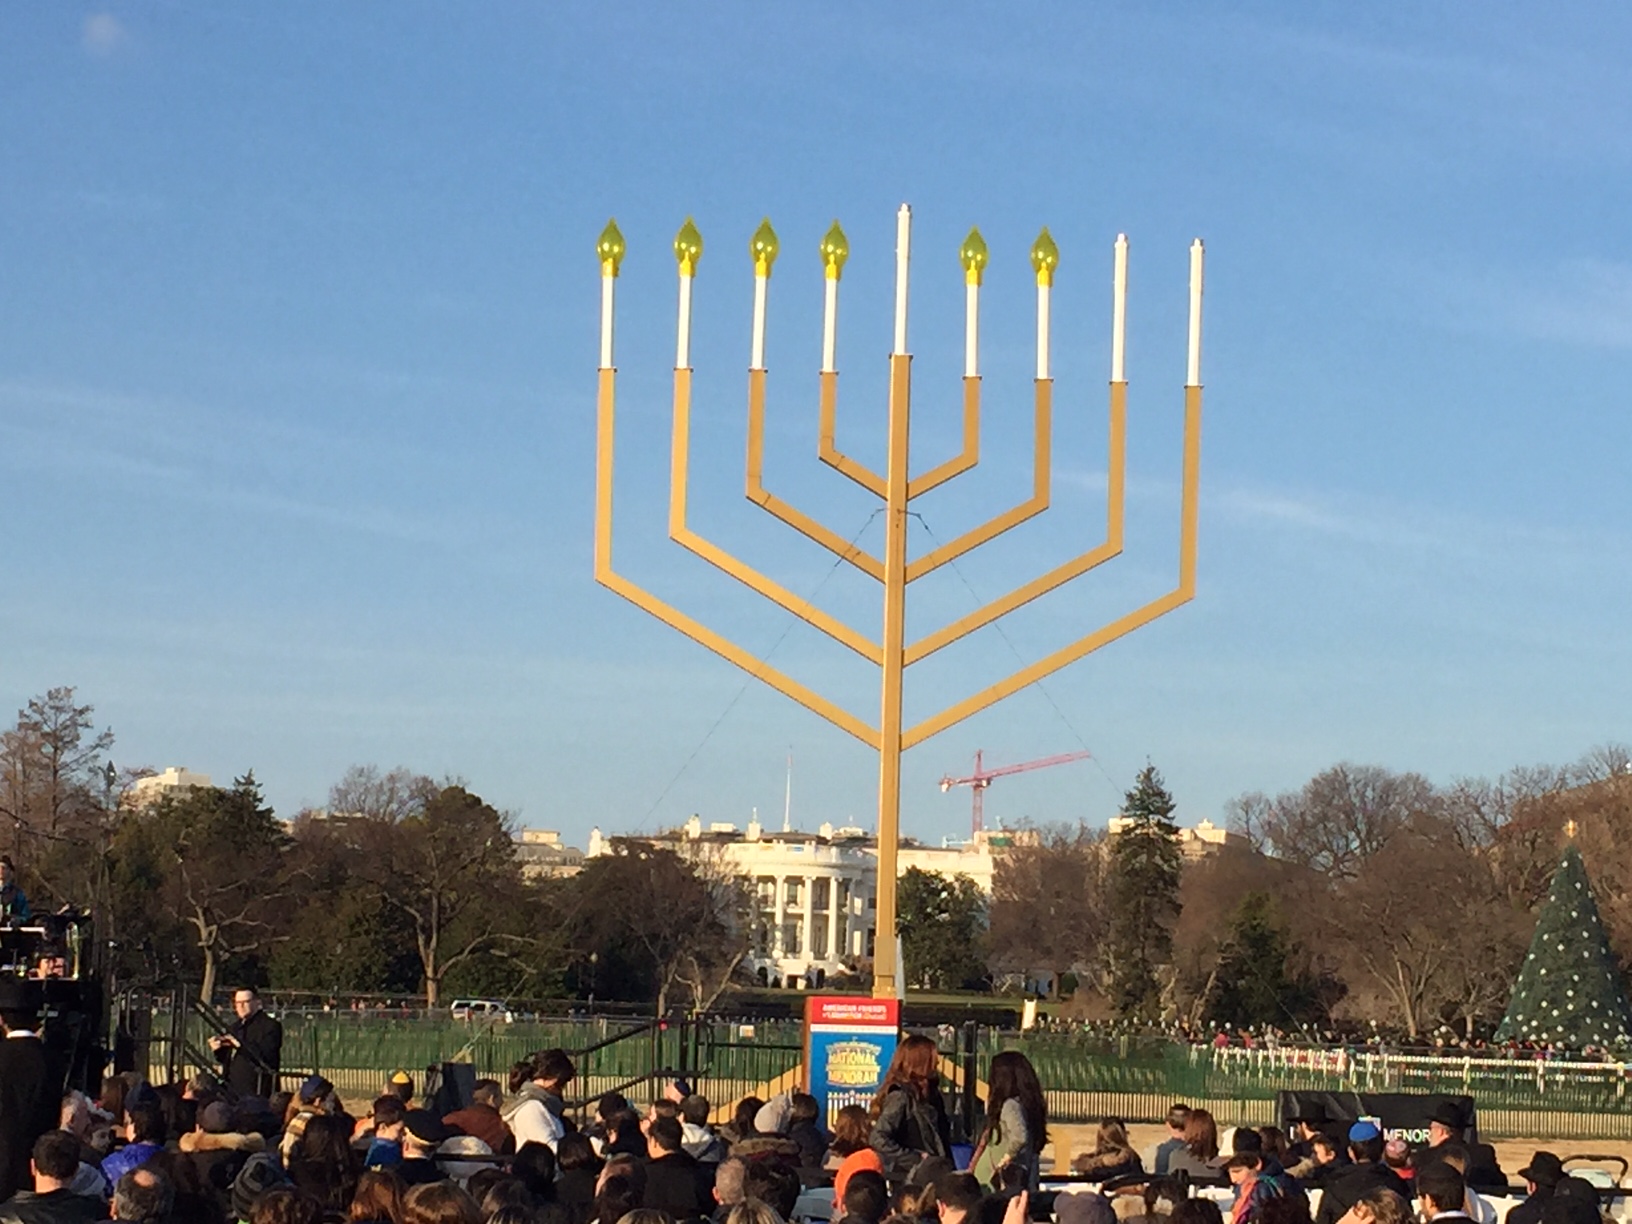 <p><a href="https://nationalmenorah.org/" target="_blank" rel="noopener"><strong>National Menorah</strong></a></p>
<p><em>Northeast quadrant of The Ellipse, near the White House.</em></p>
<p>The lighting of the National Menorah is at 4 p.m. on Dec. 10.  <a href="https://nationalmenorah.org/event-page/" target="_blank" rel="noopener">Tickets are free</a> and can be ordered ahead of time.</p>
<p><a href="https://wtop.com/holidays/2020/12/faqs-what-you-need-to-know-for-the-2020-national-menorah-lighting/" target="_blank" rel="noopener">Here&#8217;s what to know about this year&#8217;s celebration</a>.</p>
